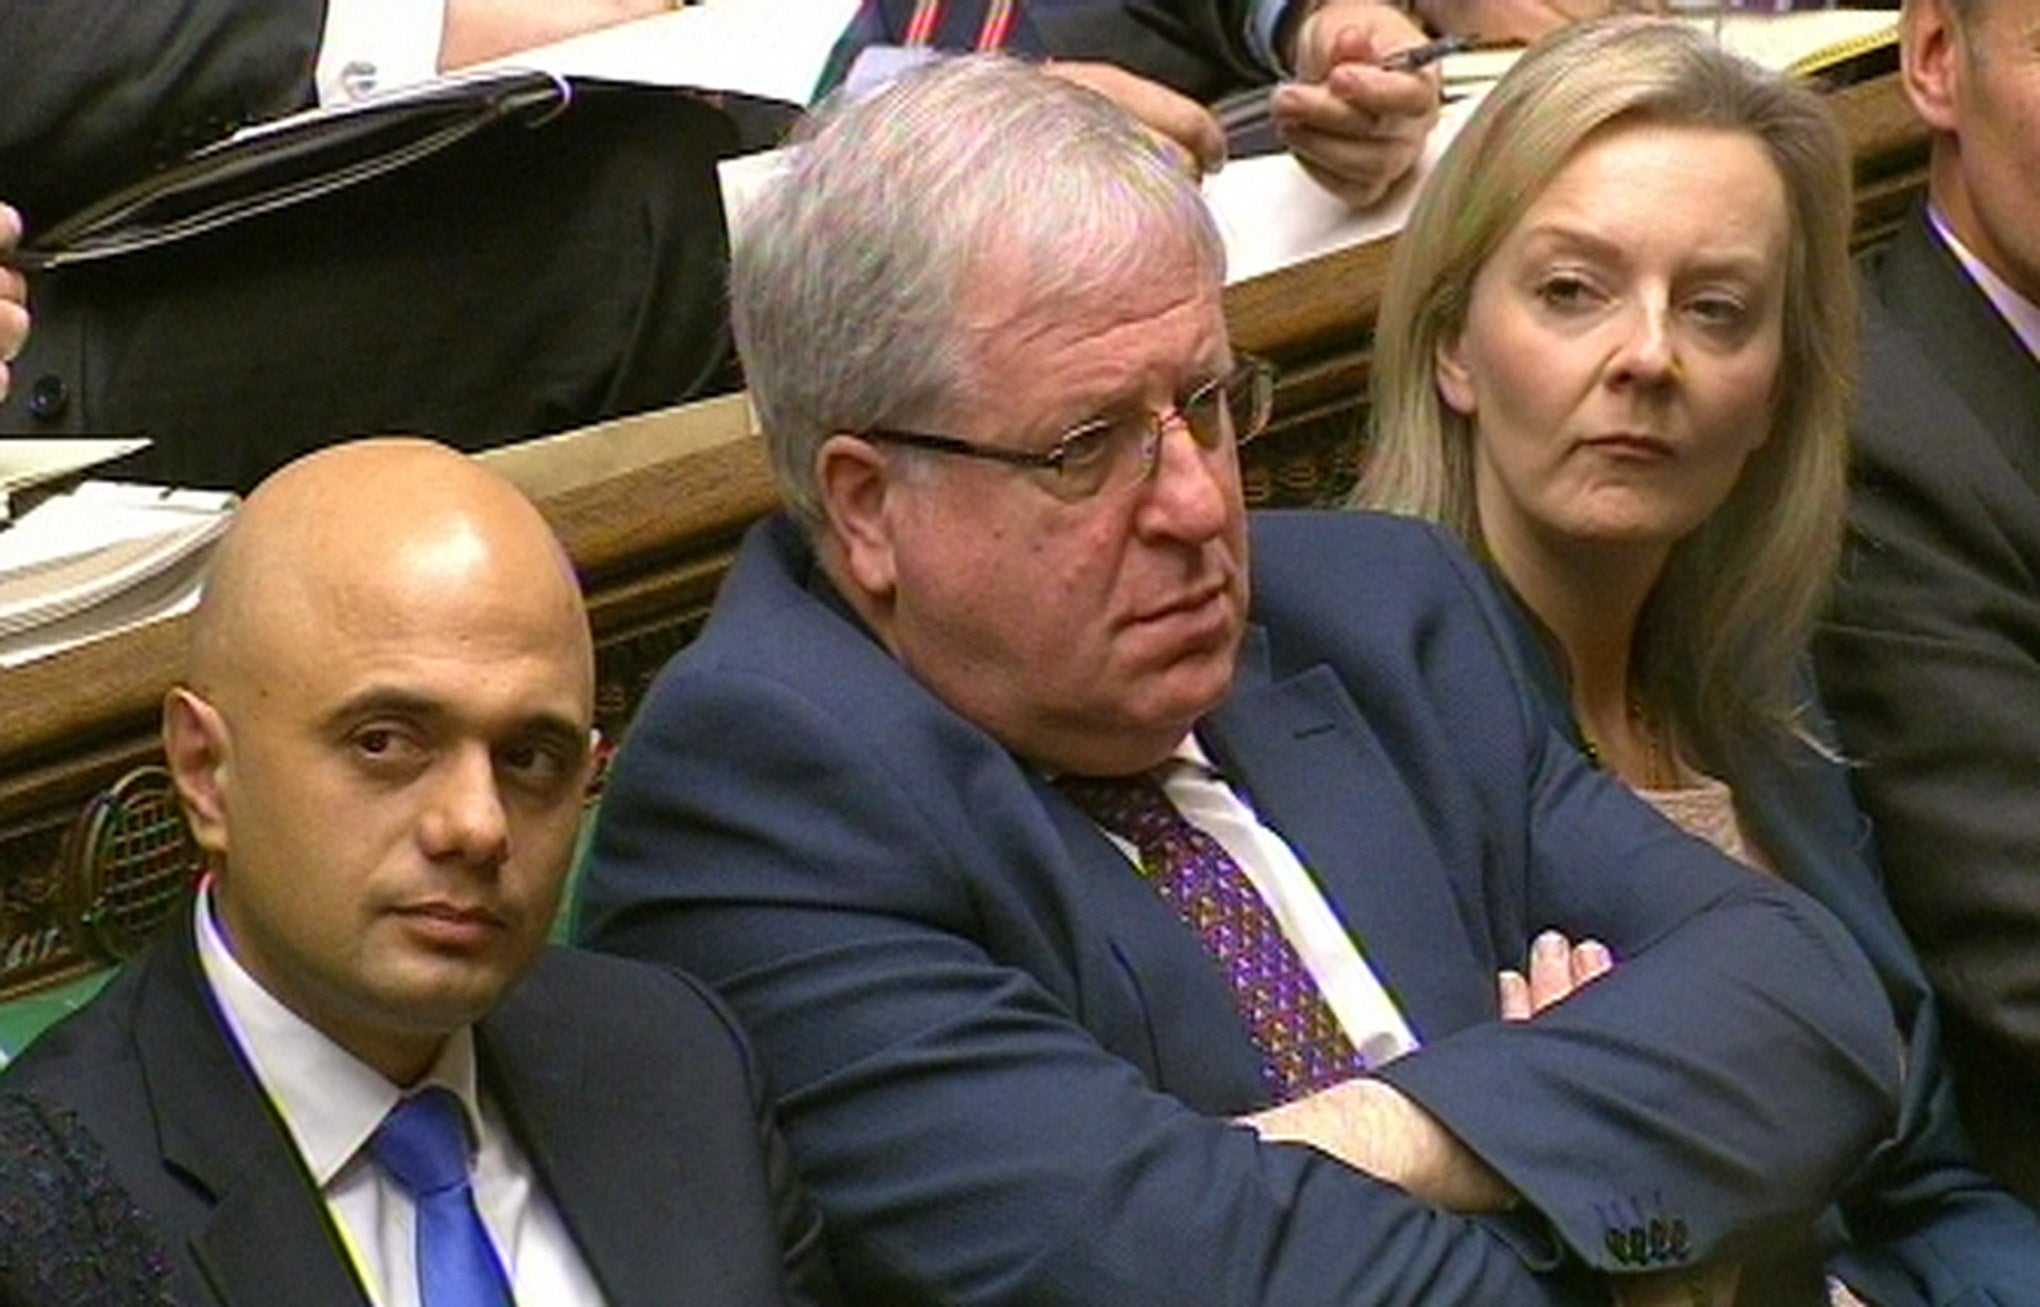 Transport Secretary Patrick McLoughlin faces questions in the House of Commons